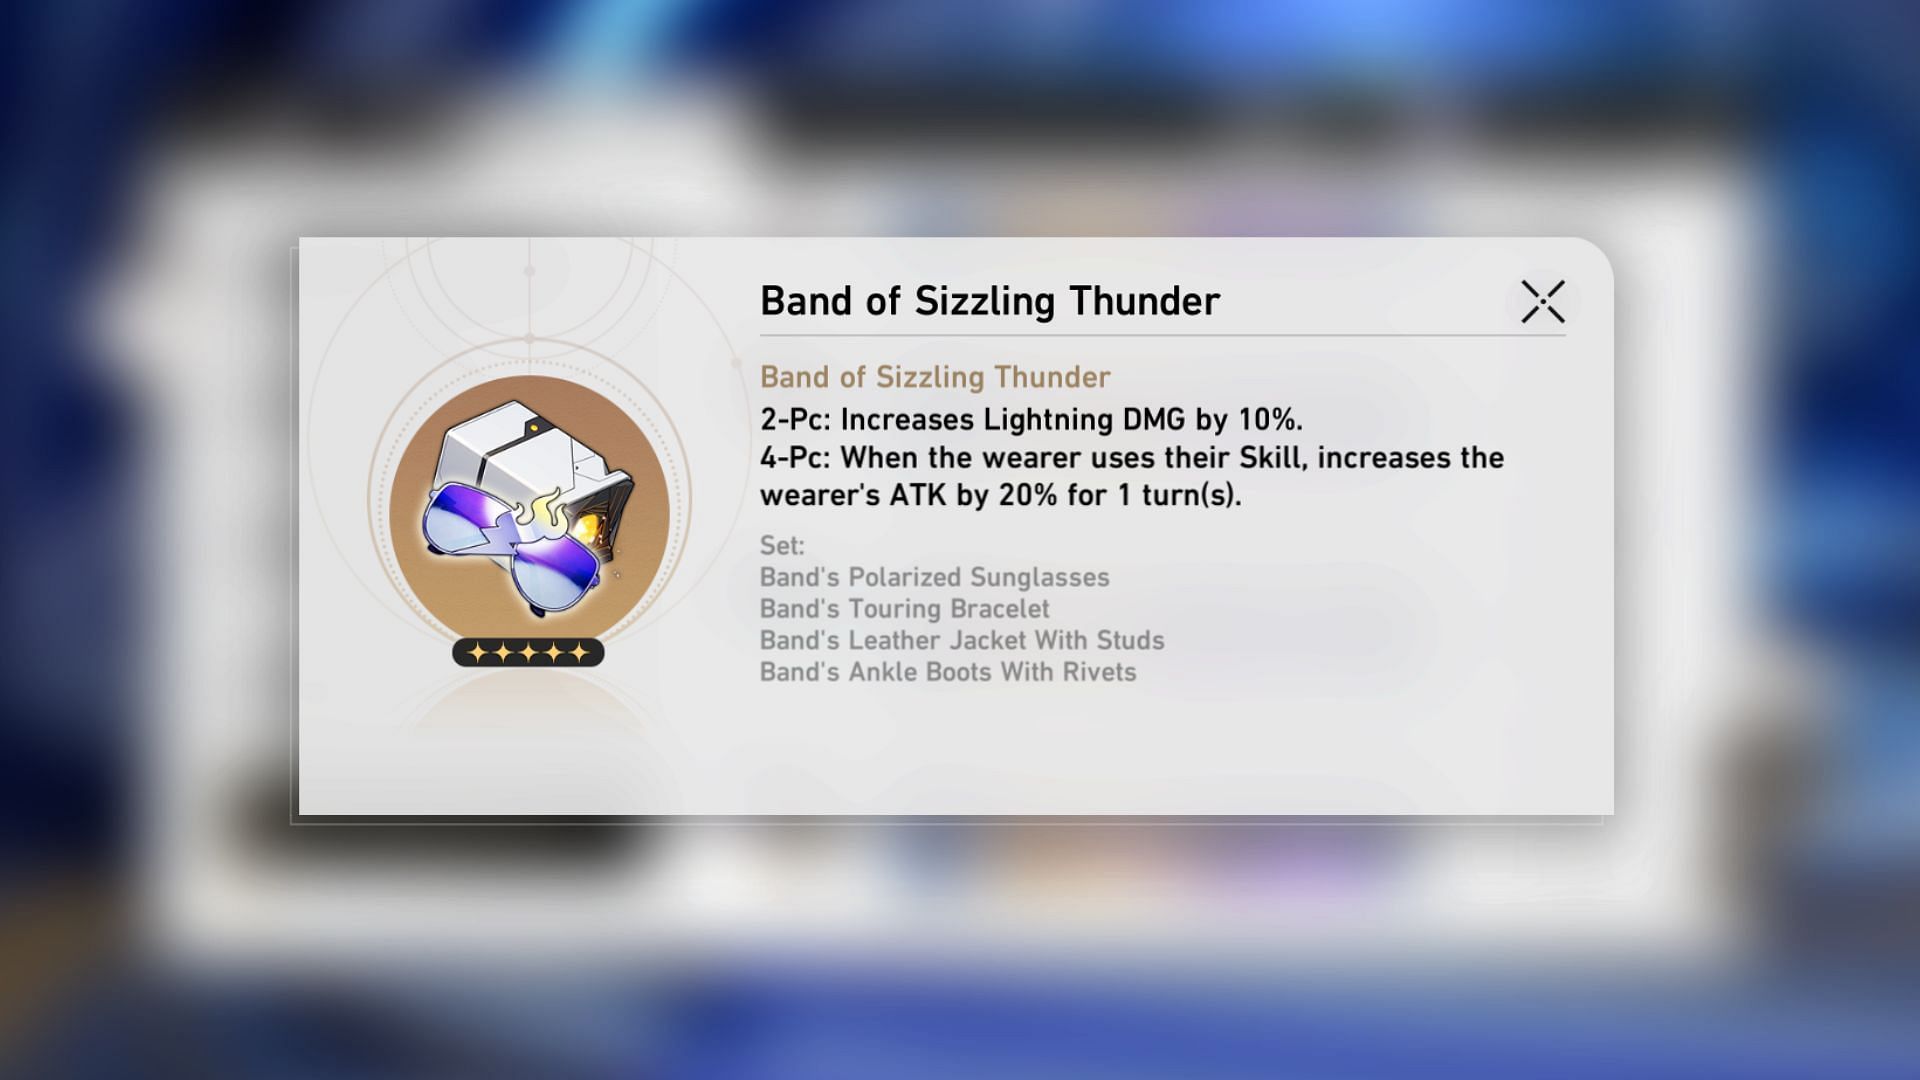 4-Piece Band of Sizzling Thunder is the best Relic set for Jing Yuan (Image via HoYoverse)